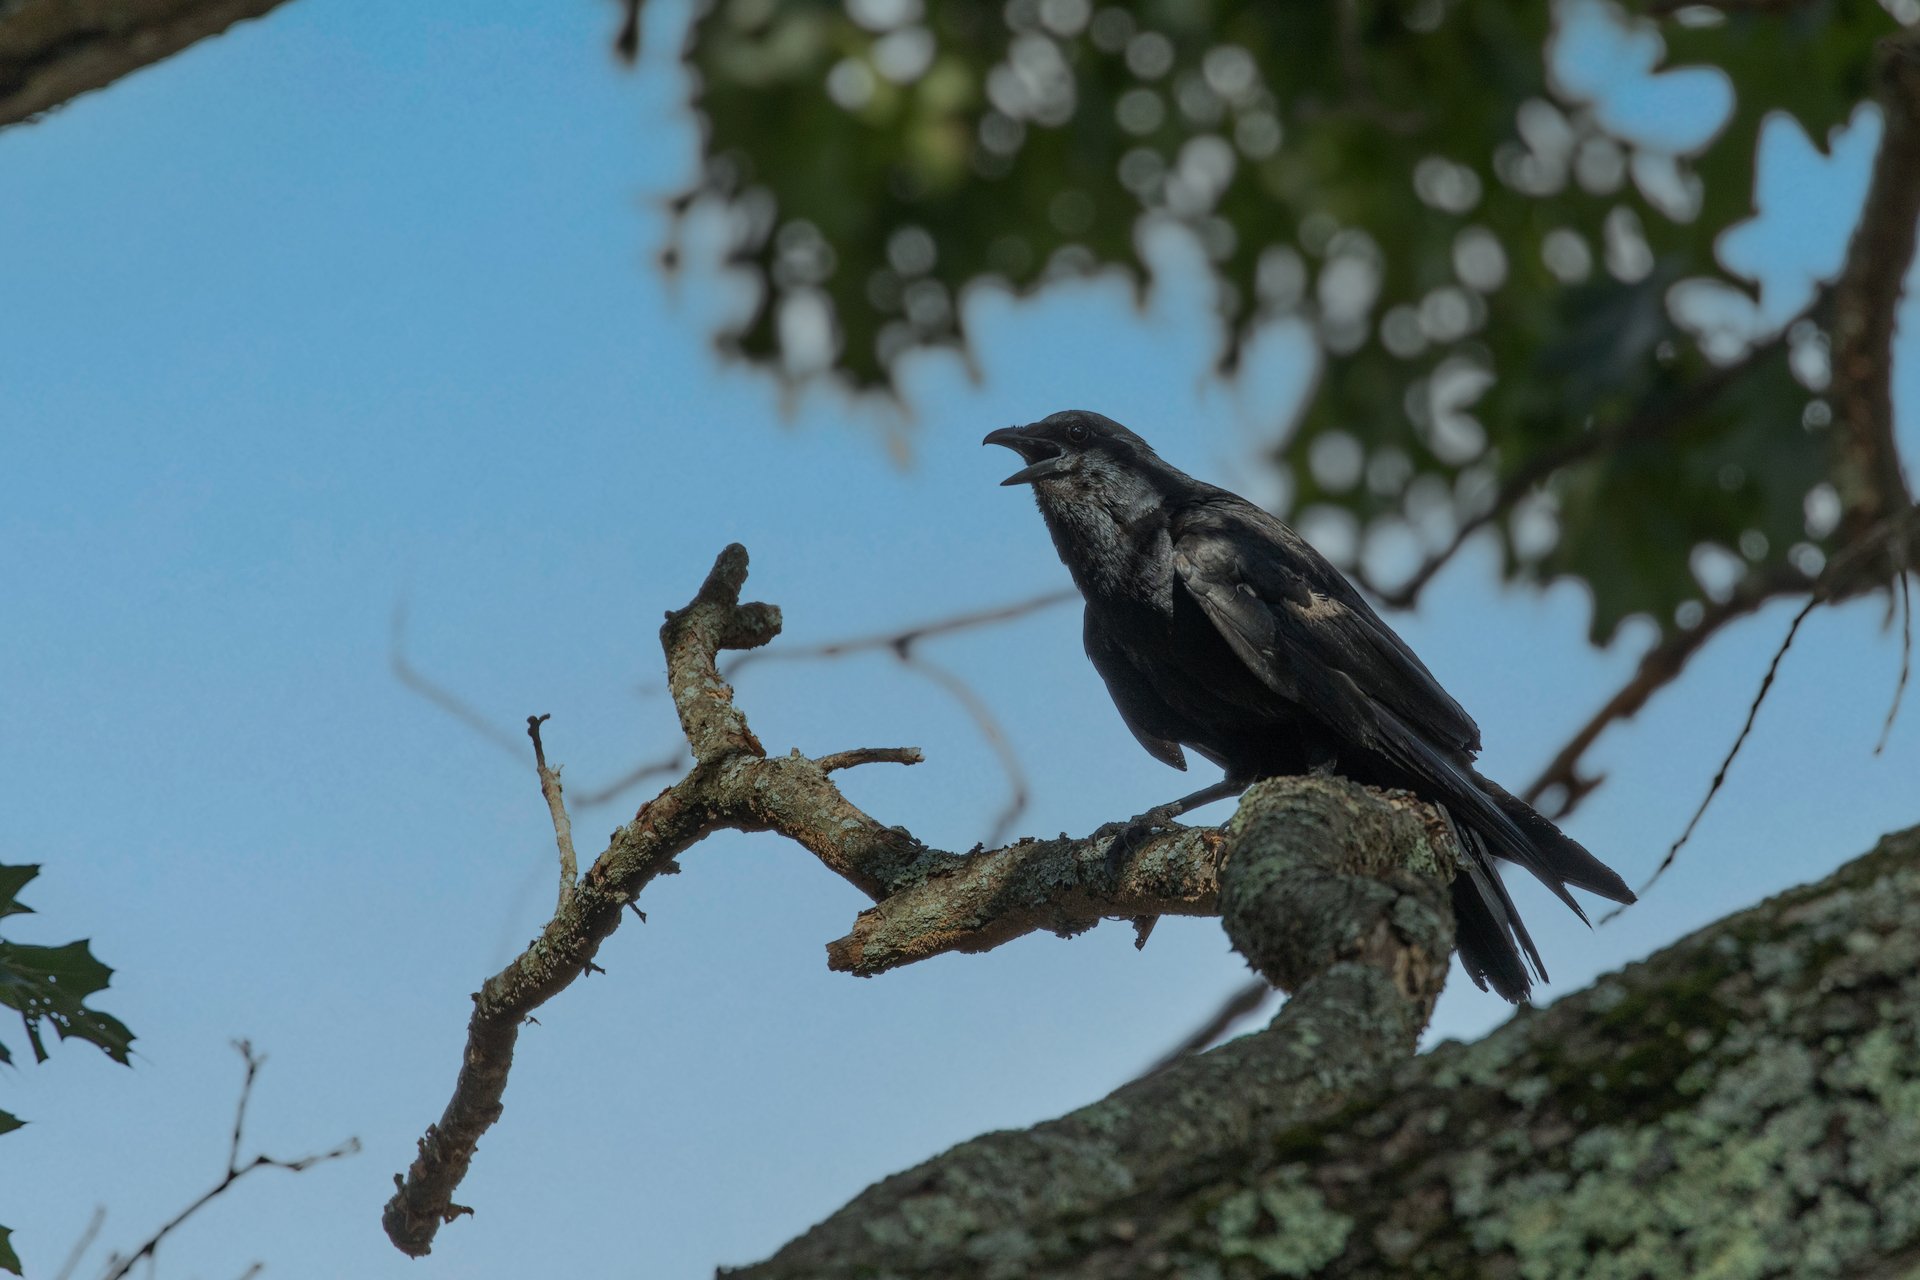 A Fish Crow caws atop a tree branch.